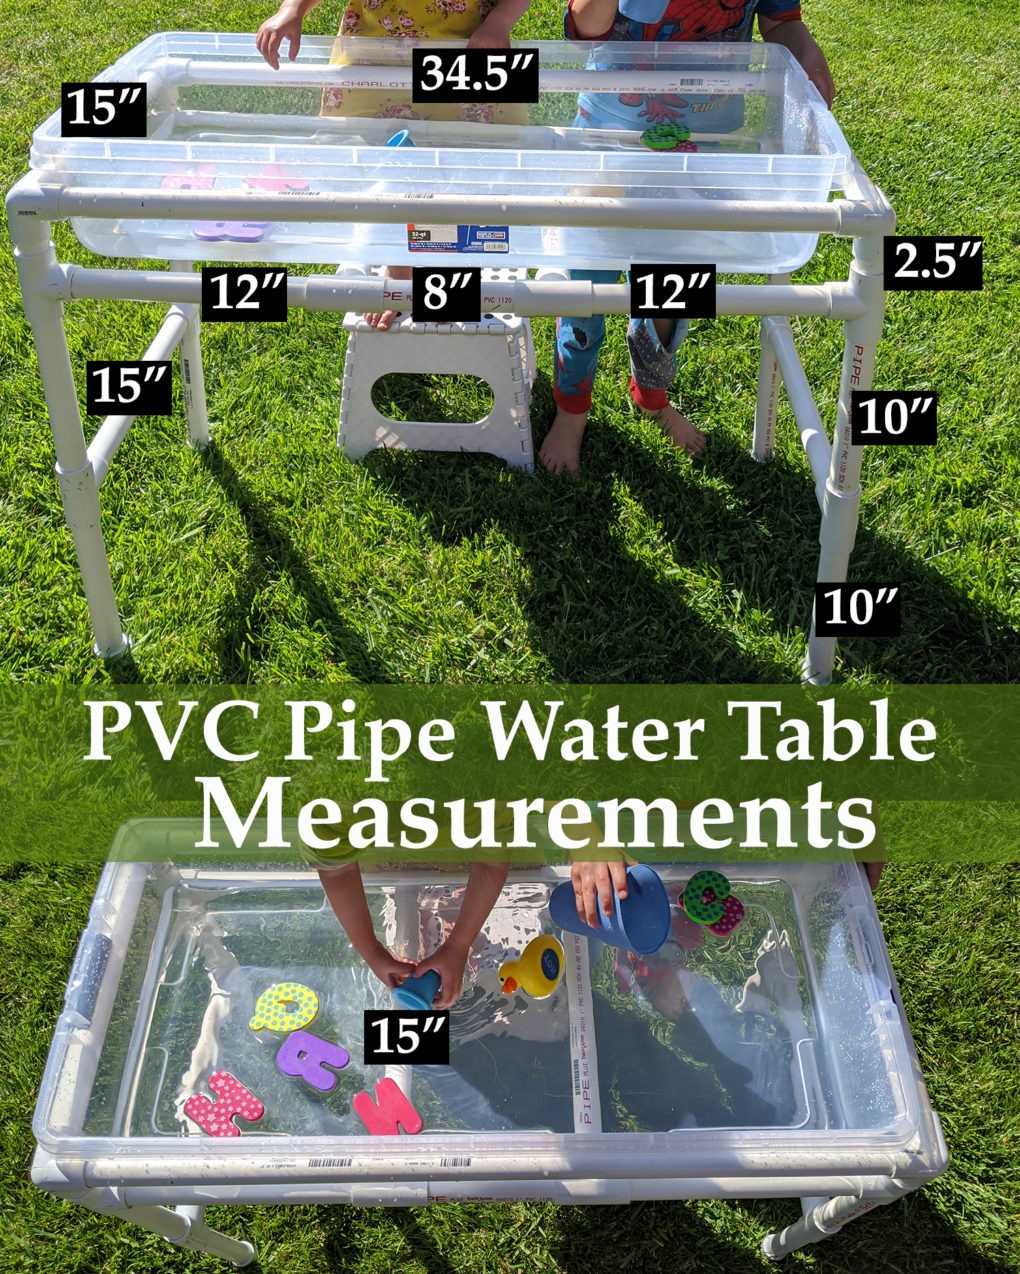 PVC Pipe Water Table Measurements. Tutorial for how to make your own DIY PVC pipe water table for backyard fun with the kids this summer. Easy and simple outside entertainment for toddlers.